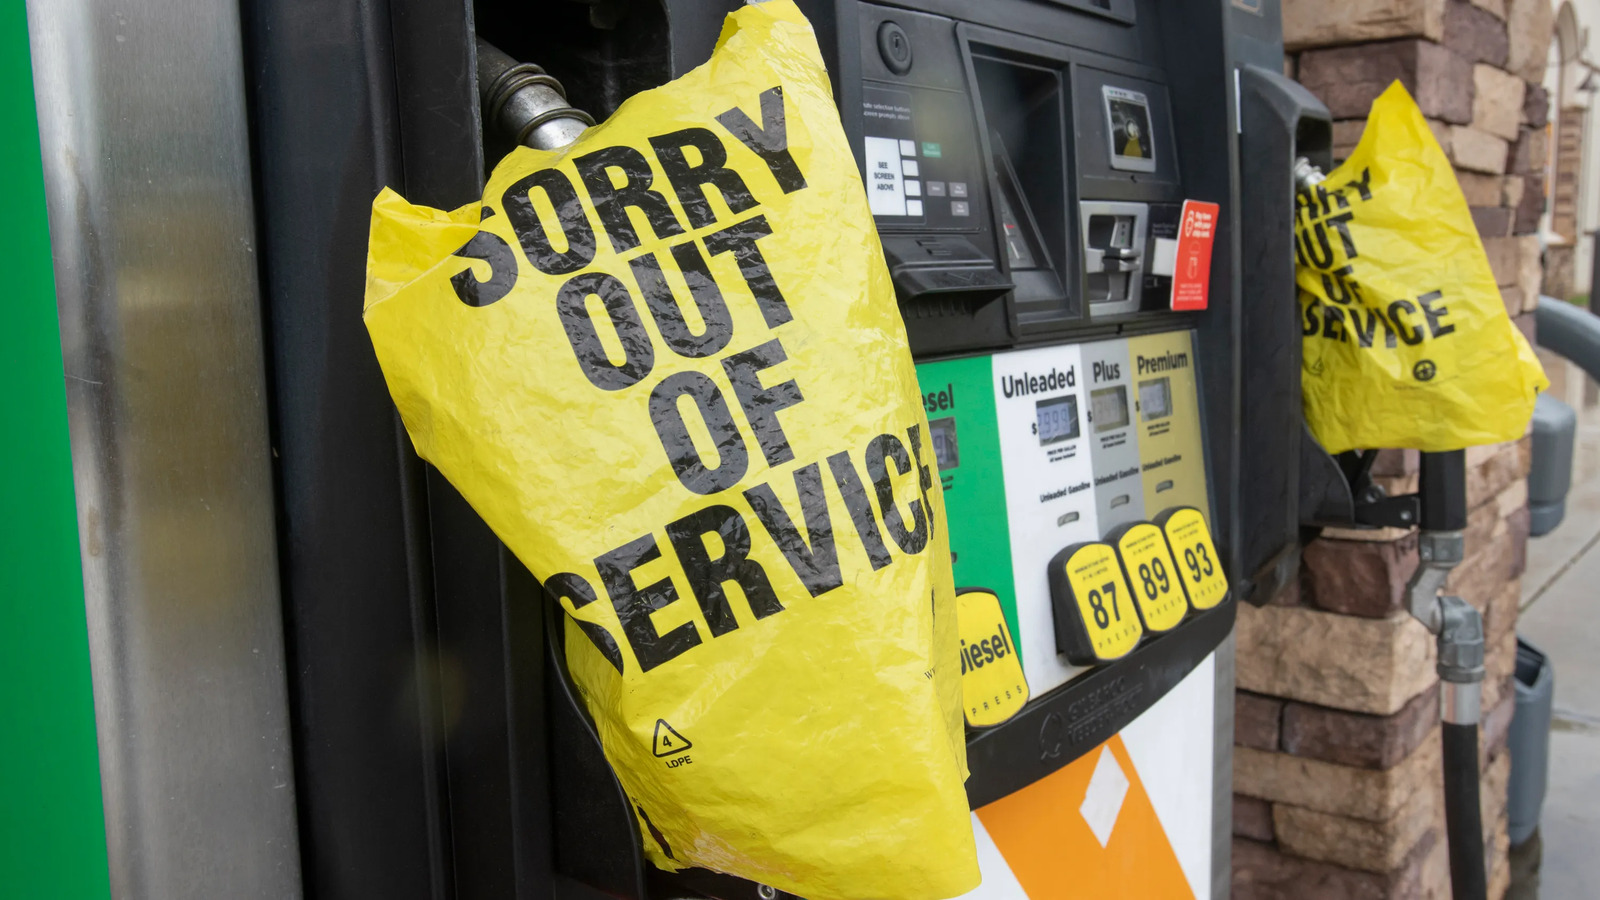 Diesel Shortage In The US Exaggeration or Fact? CoinChapter…